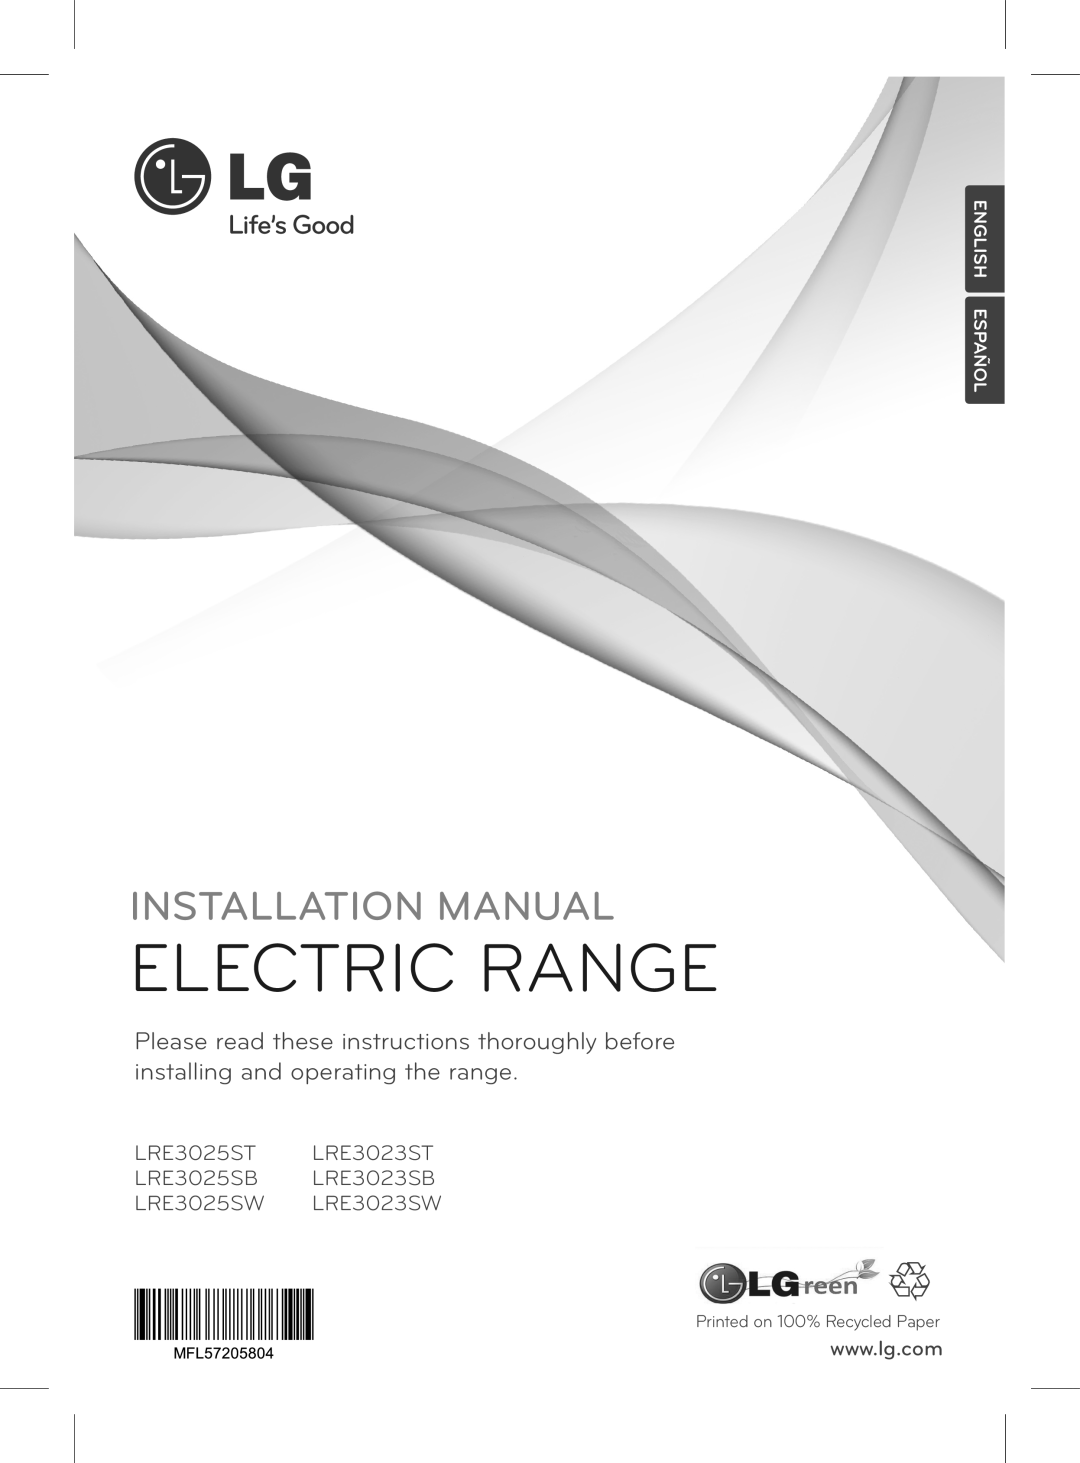 LG Electronics LRE3025SW, LRE3025SB installation manual English Pes Añol, Printed on 100% Recycled Paper, Electric Range 